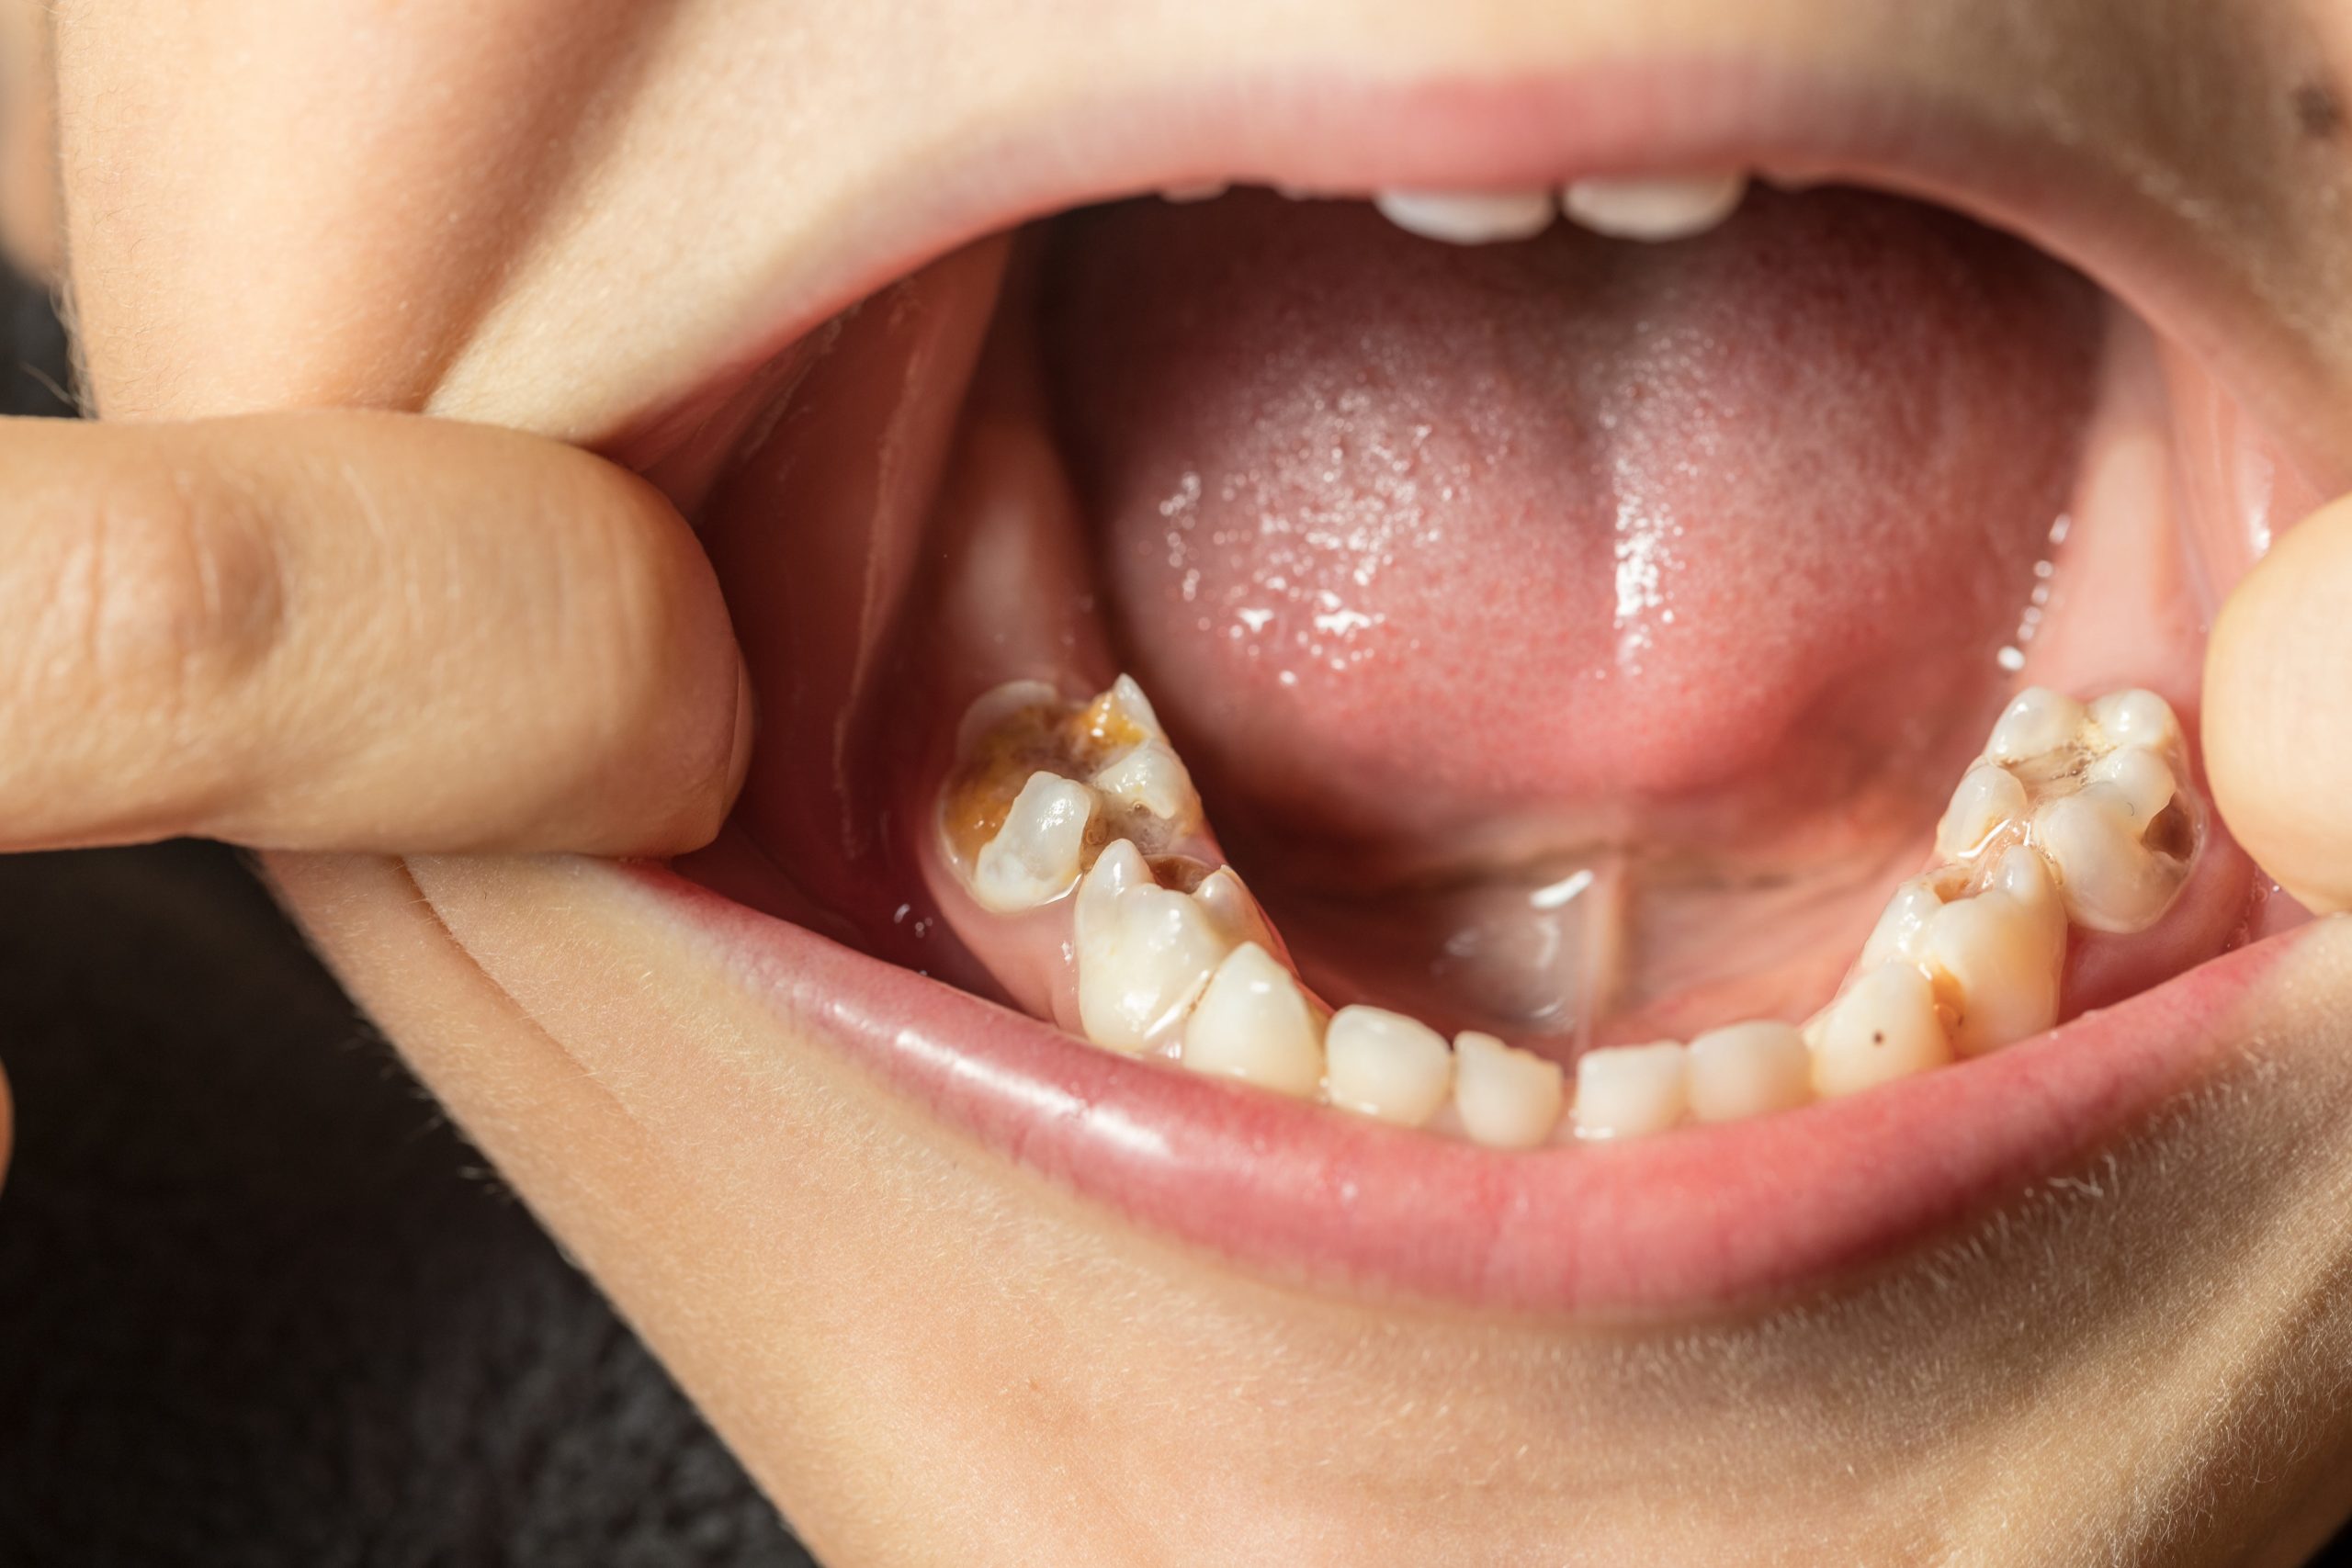 HIGH LEVELS OF TOOTH DECAY AMONG CHILDREN IN HULL